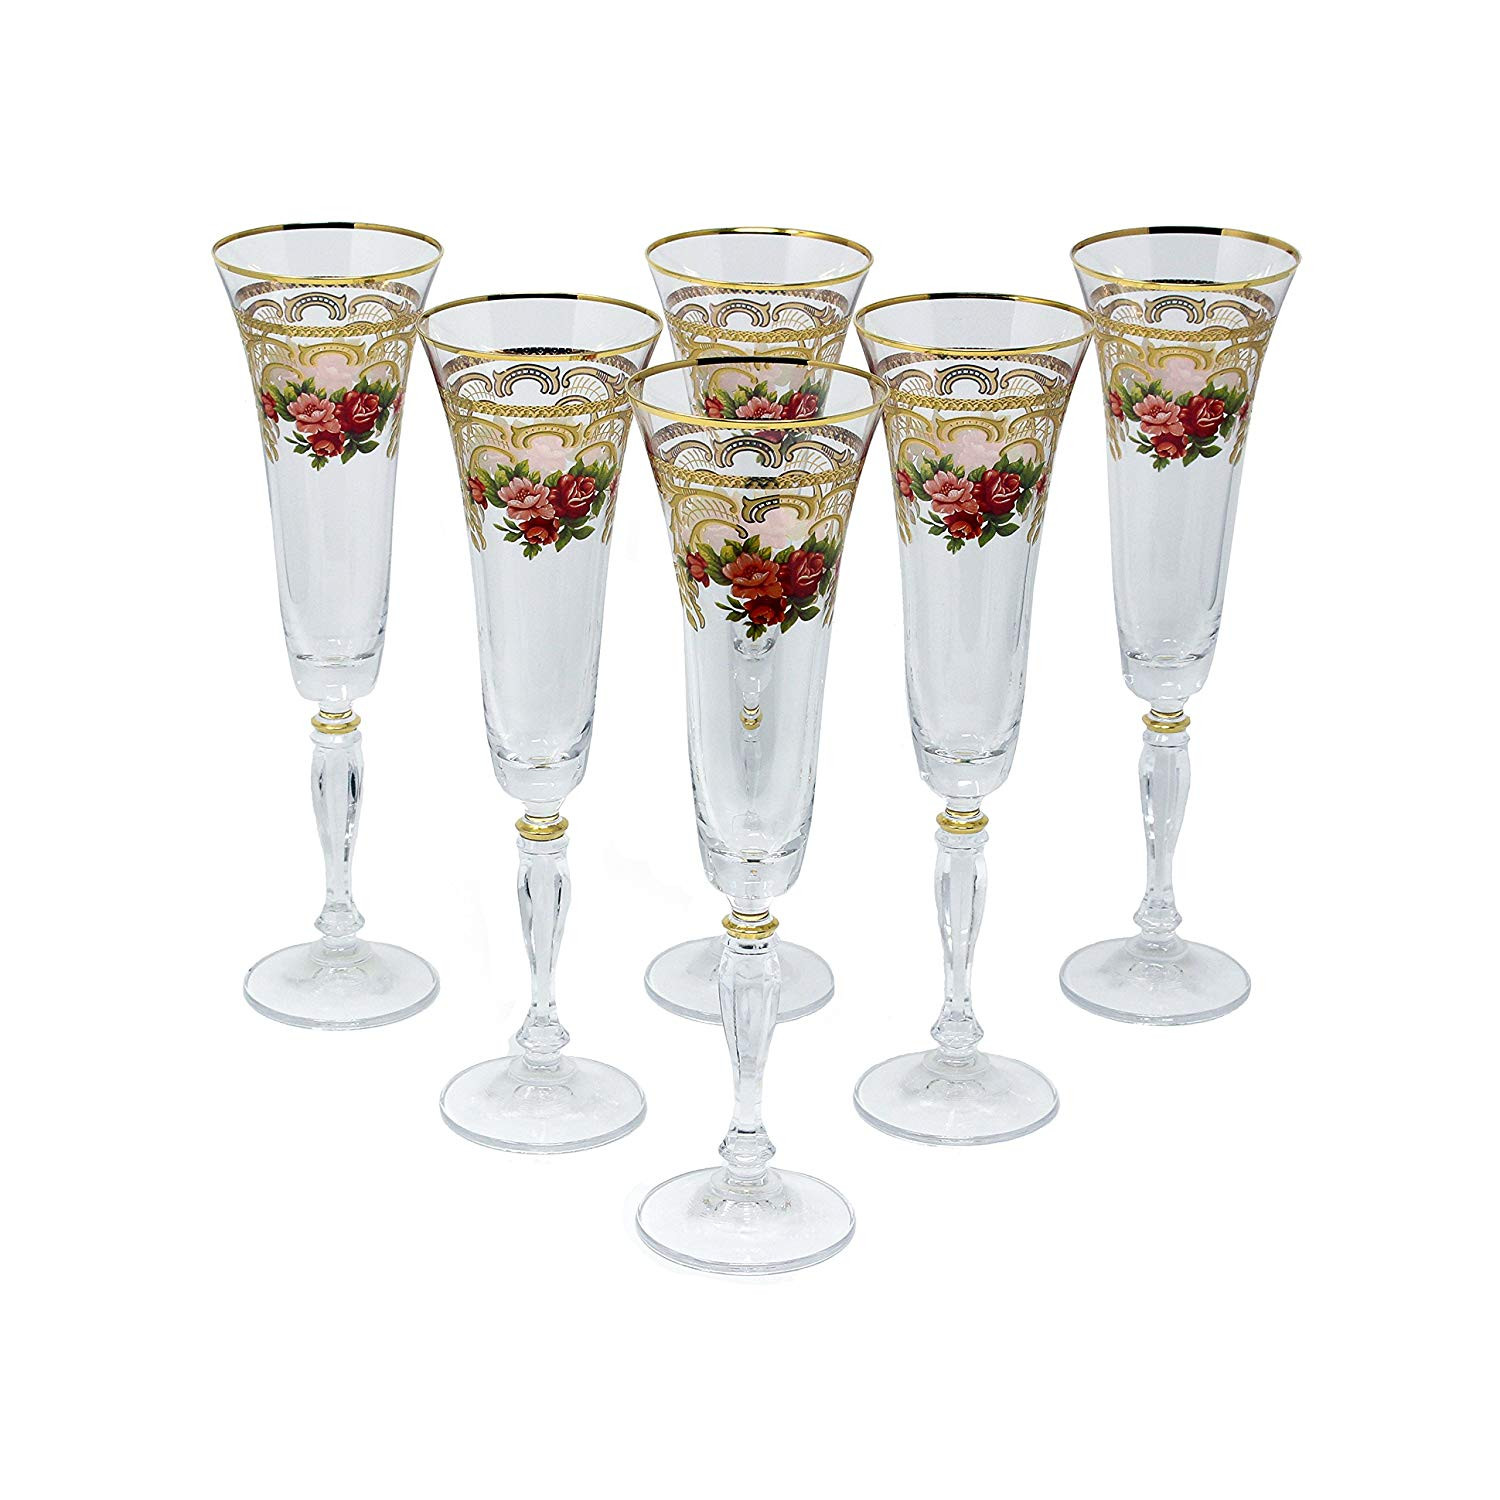 20 attractive Mikasa Florale Crystal Vase 2022 free download mikasa florale crystal vase of amazon com glazze crystal aly 081 gl champagne flute gold floral inside amazon com glazze crystal aly 081 gl champagne flute gold floral champagne glasses